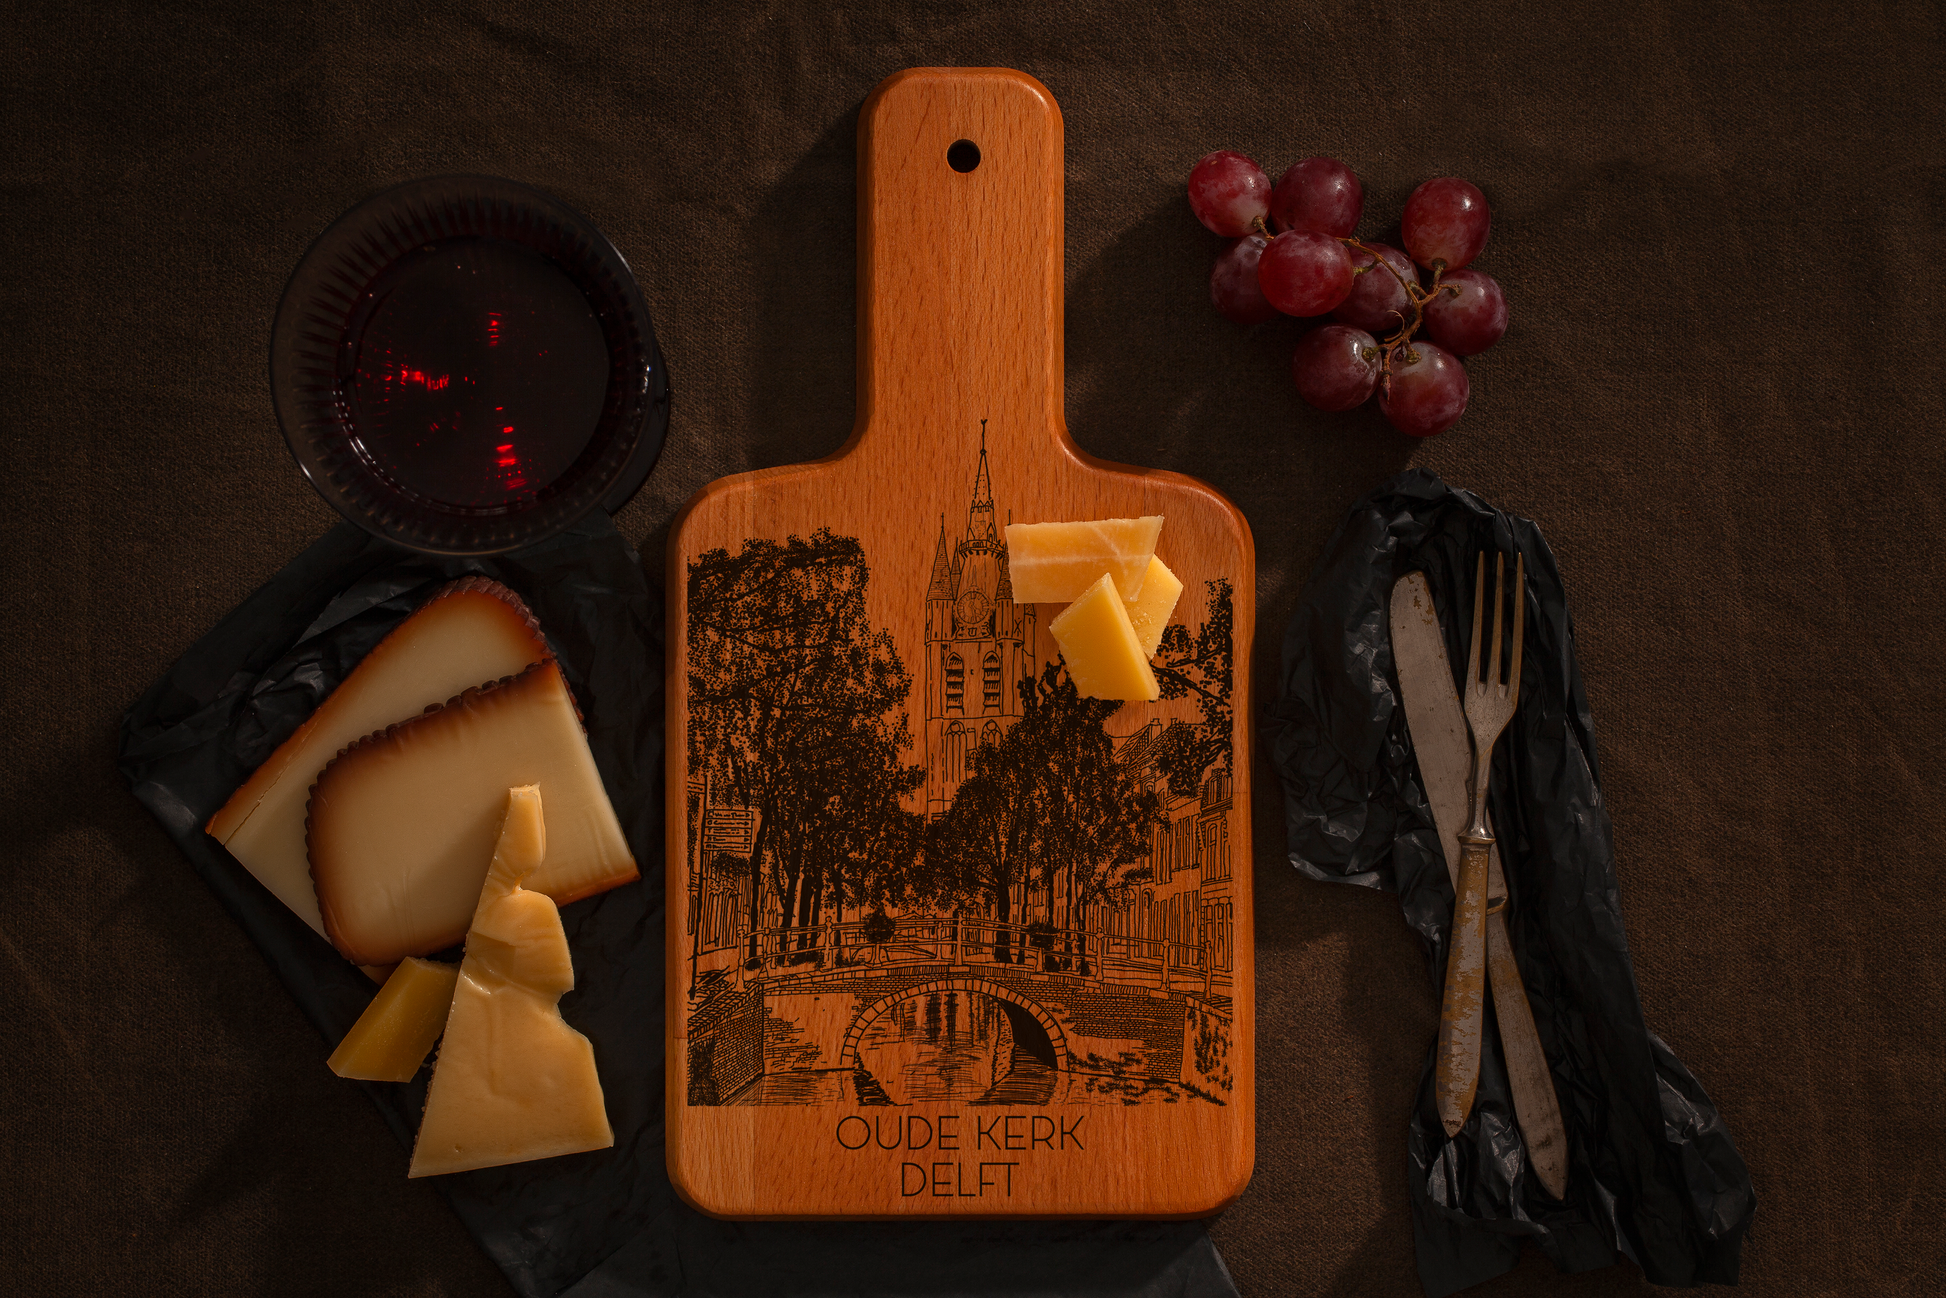 Delft, Oude Kerk, cheese board, with cheese